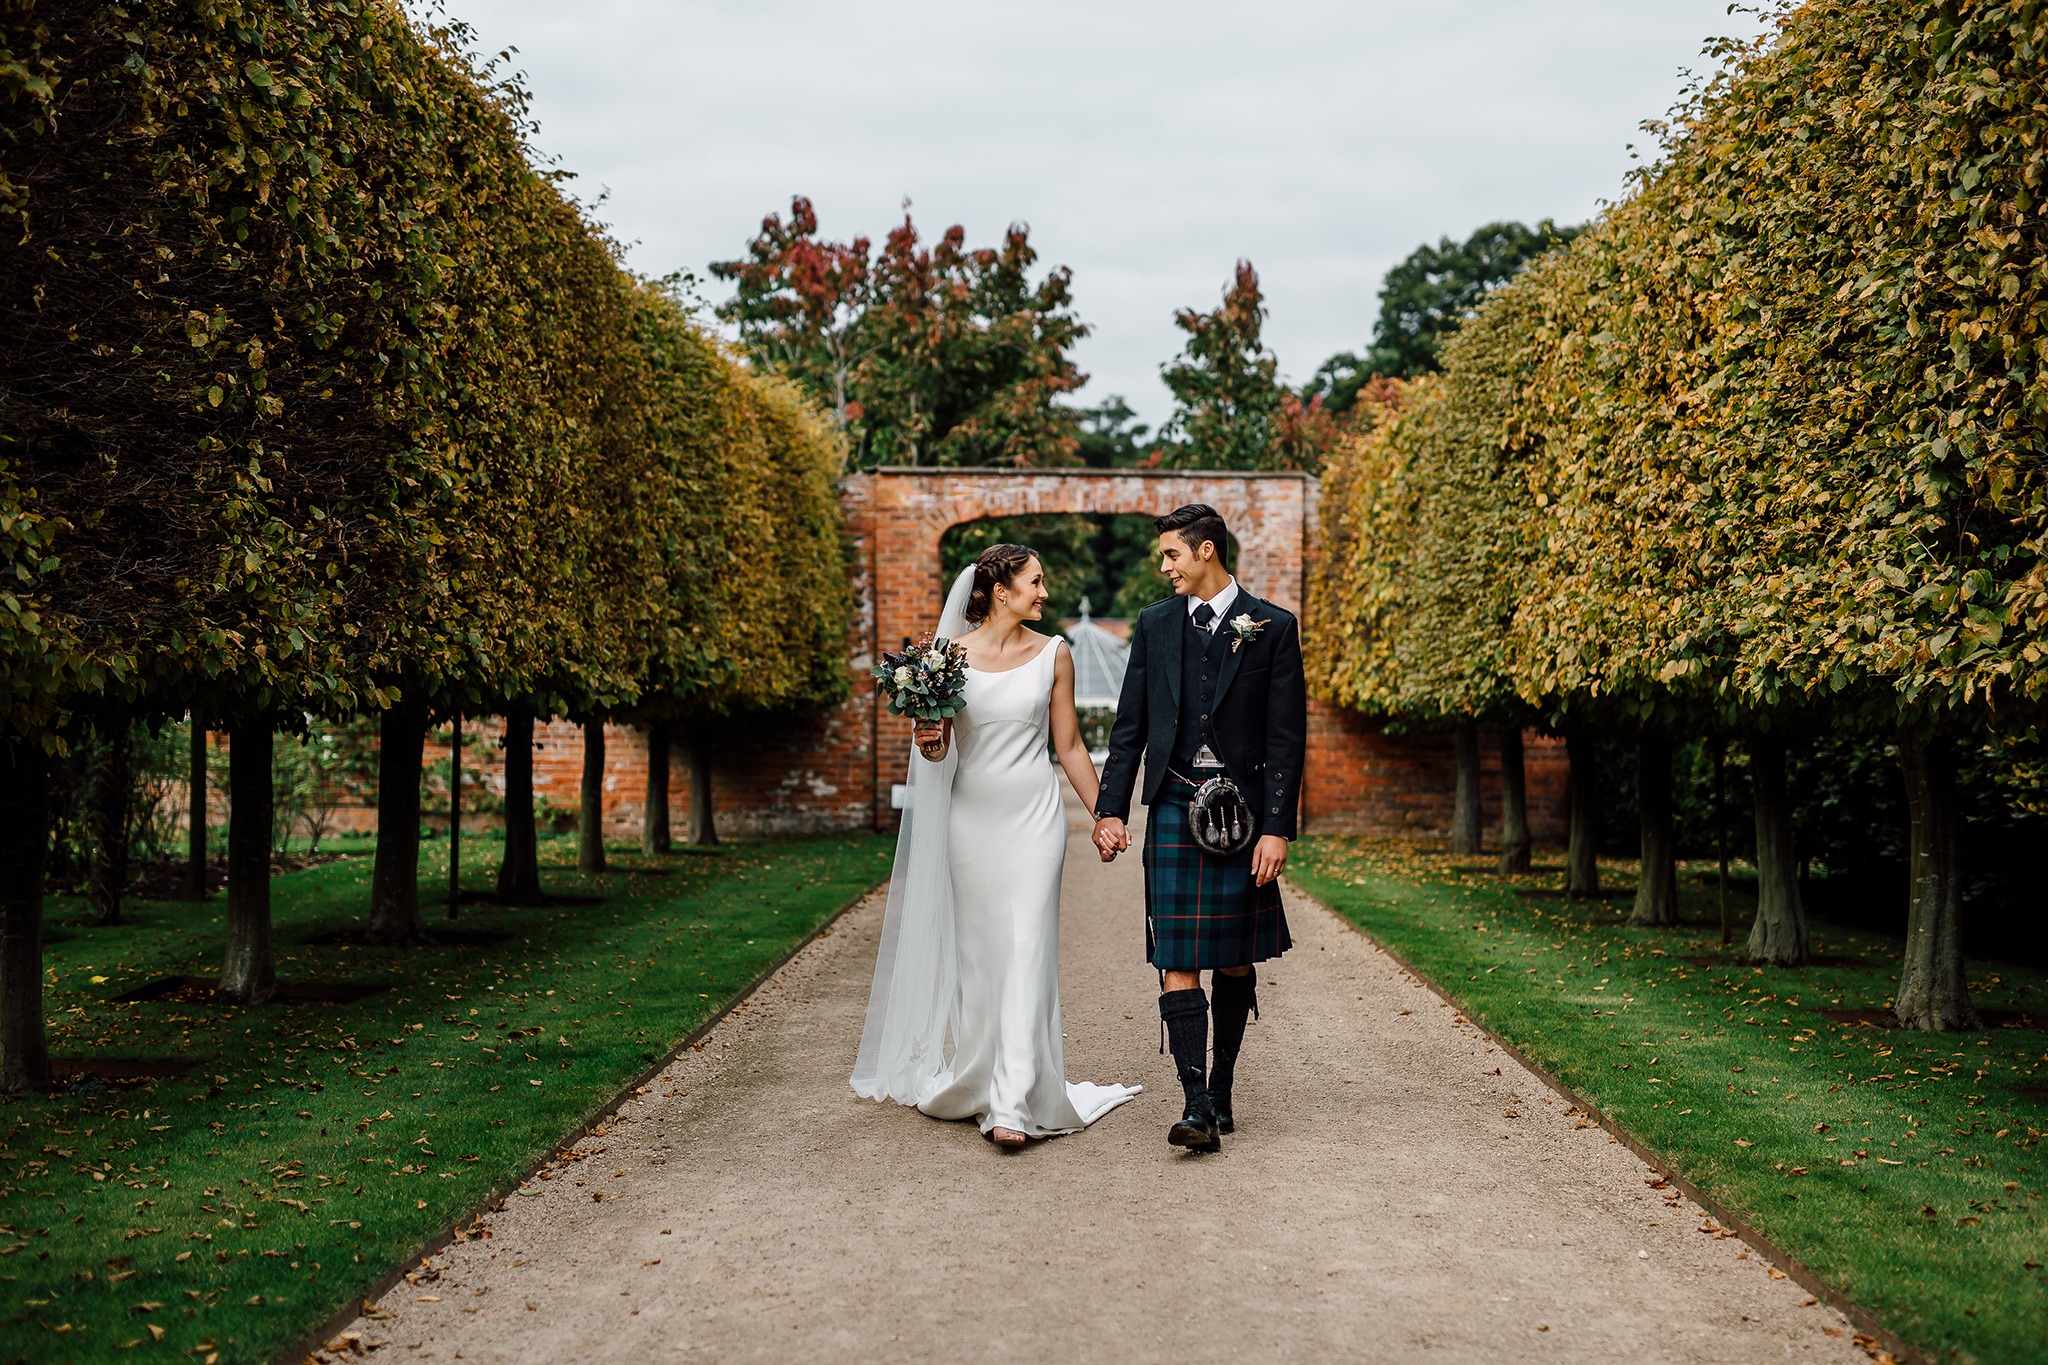 Autumn weddings at Combermere Abbey in the gardens